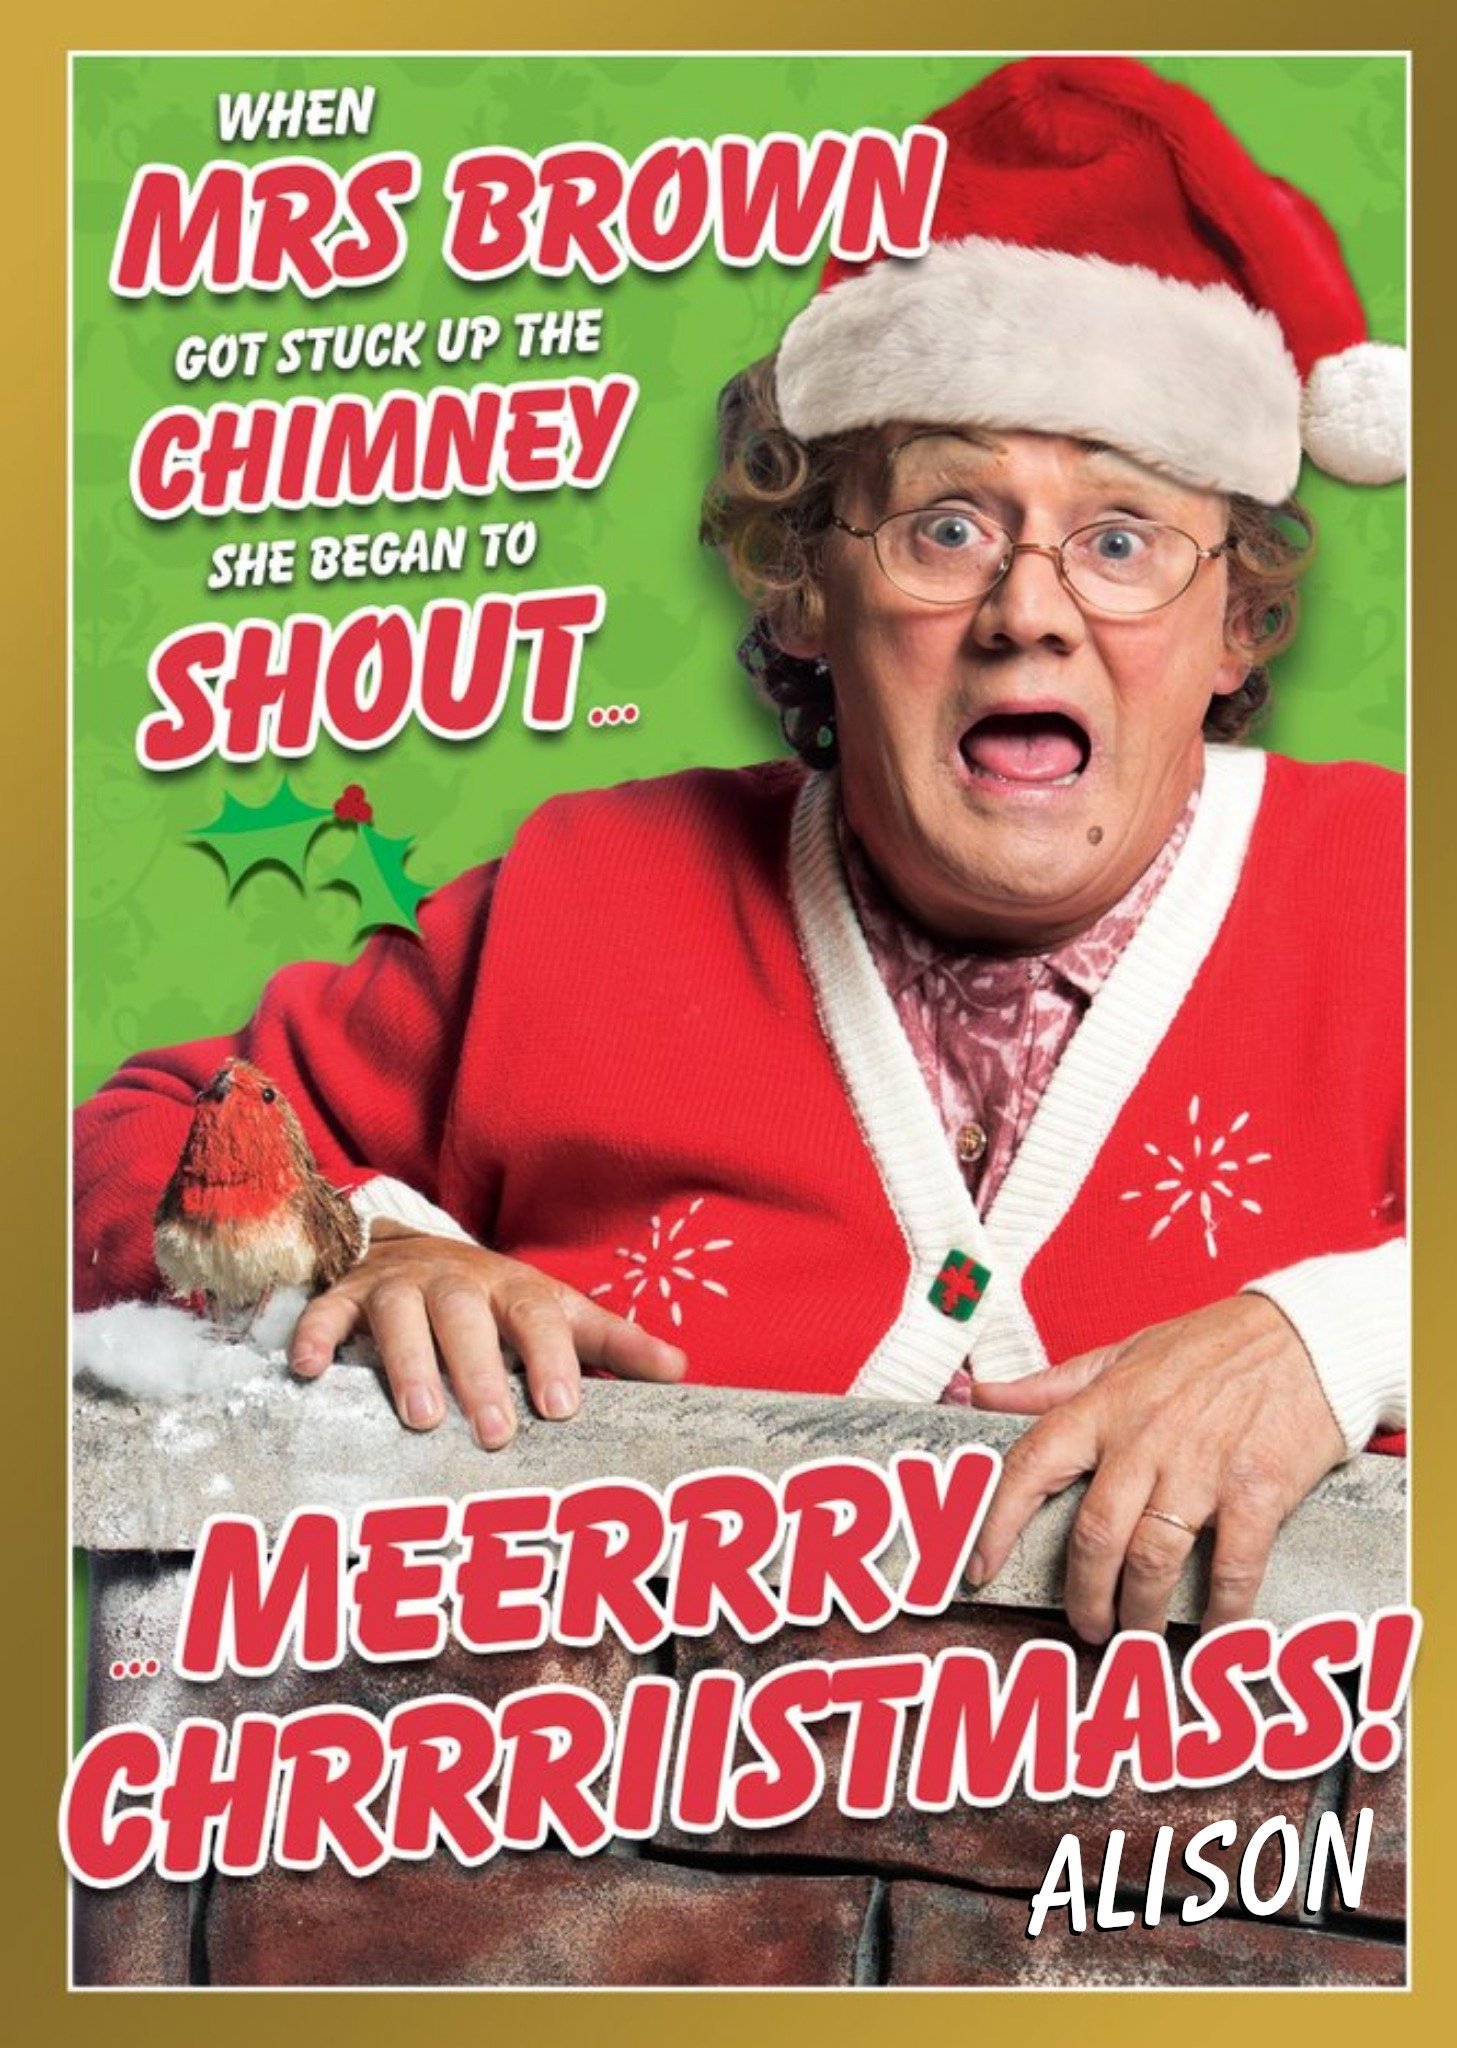 Funny Mrs Brown's Boys Up A Chimney Christmas Card Ecard